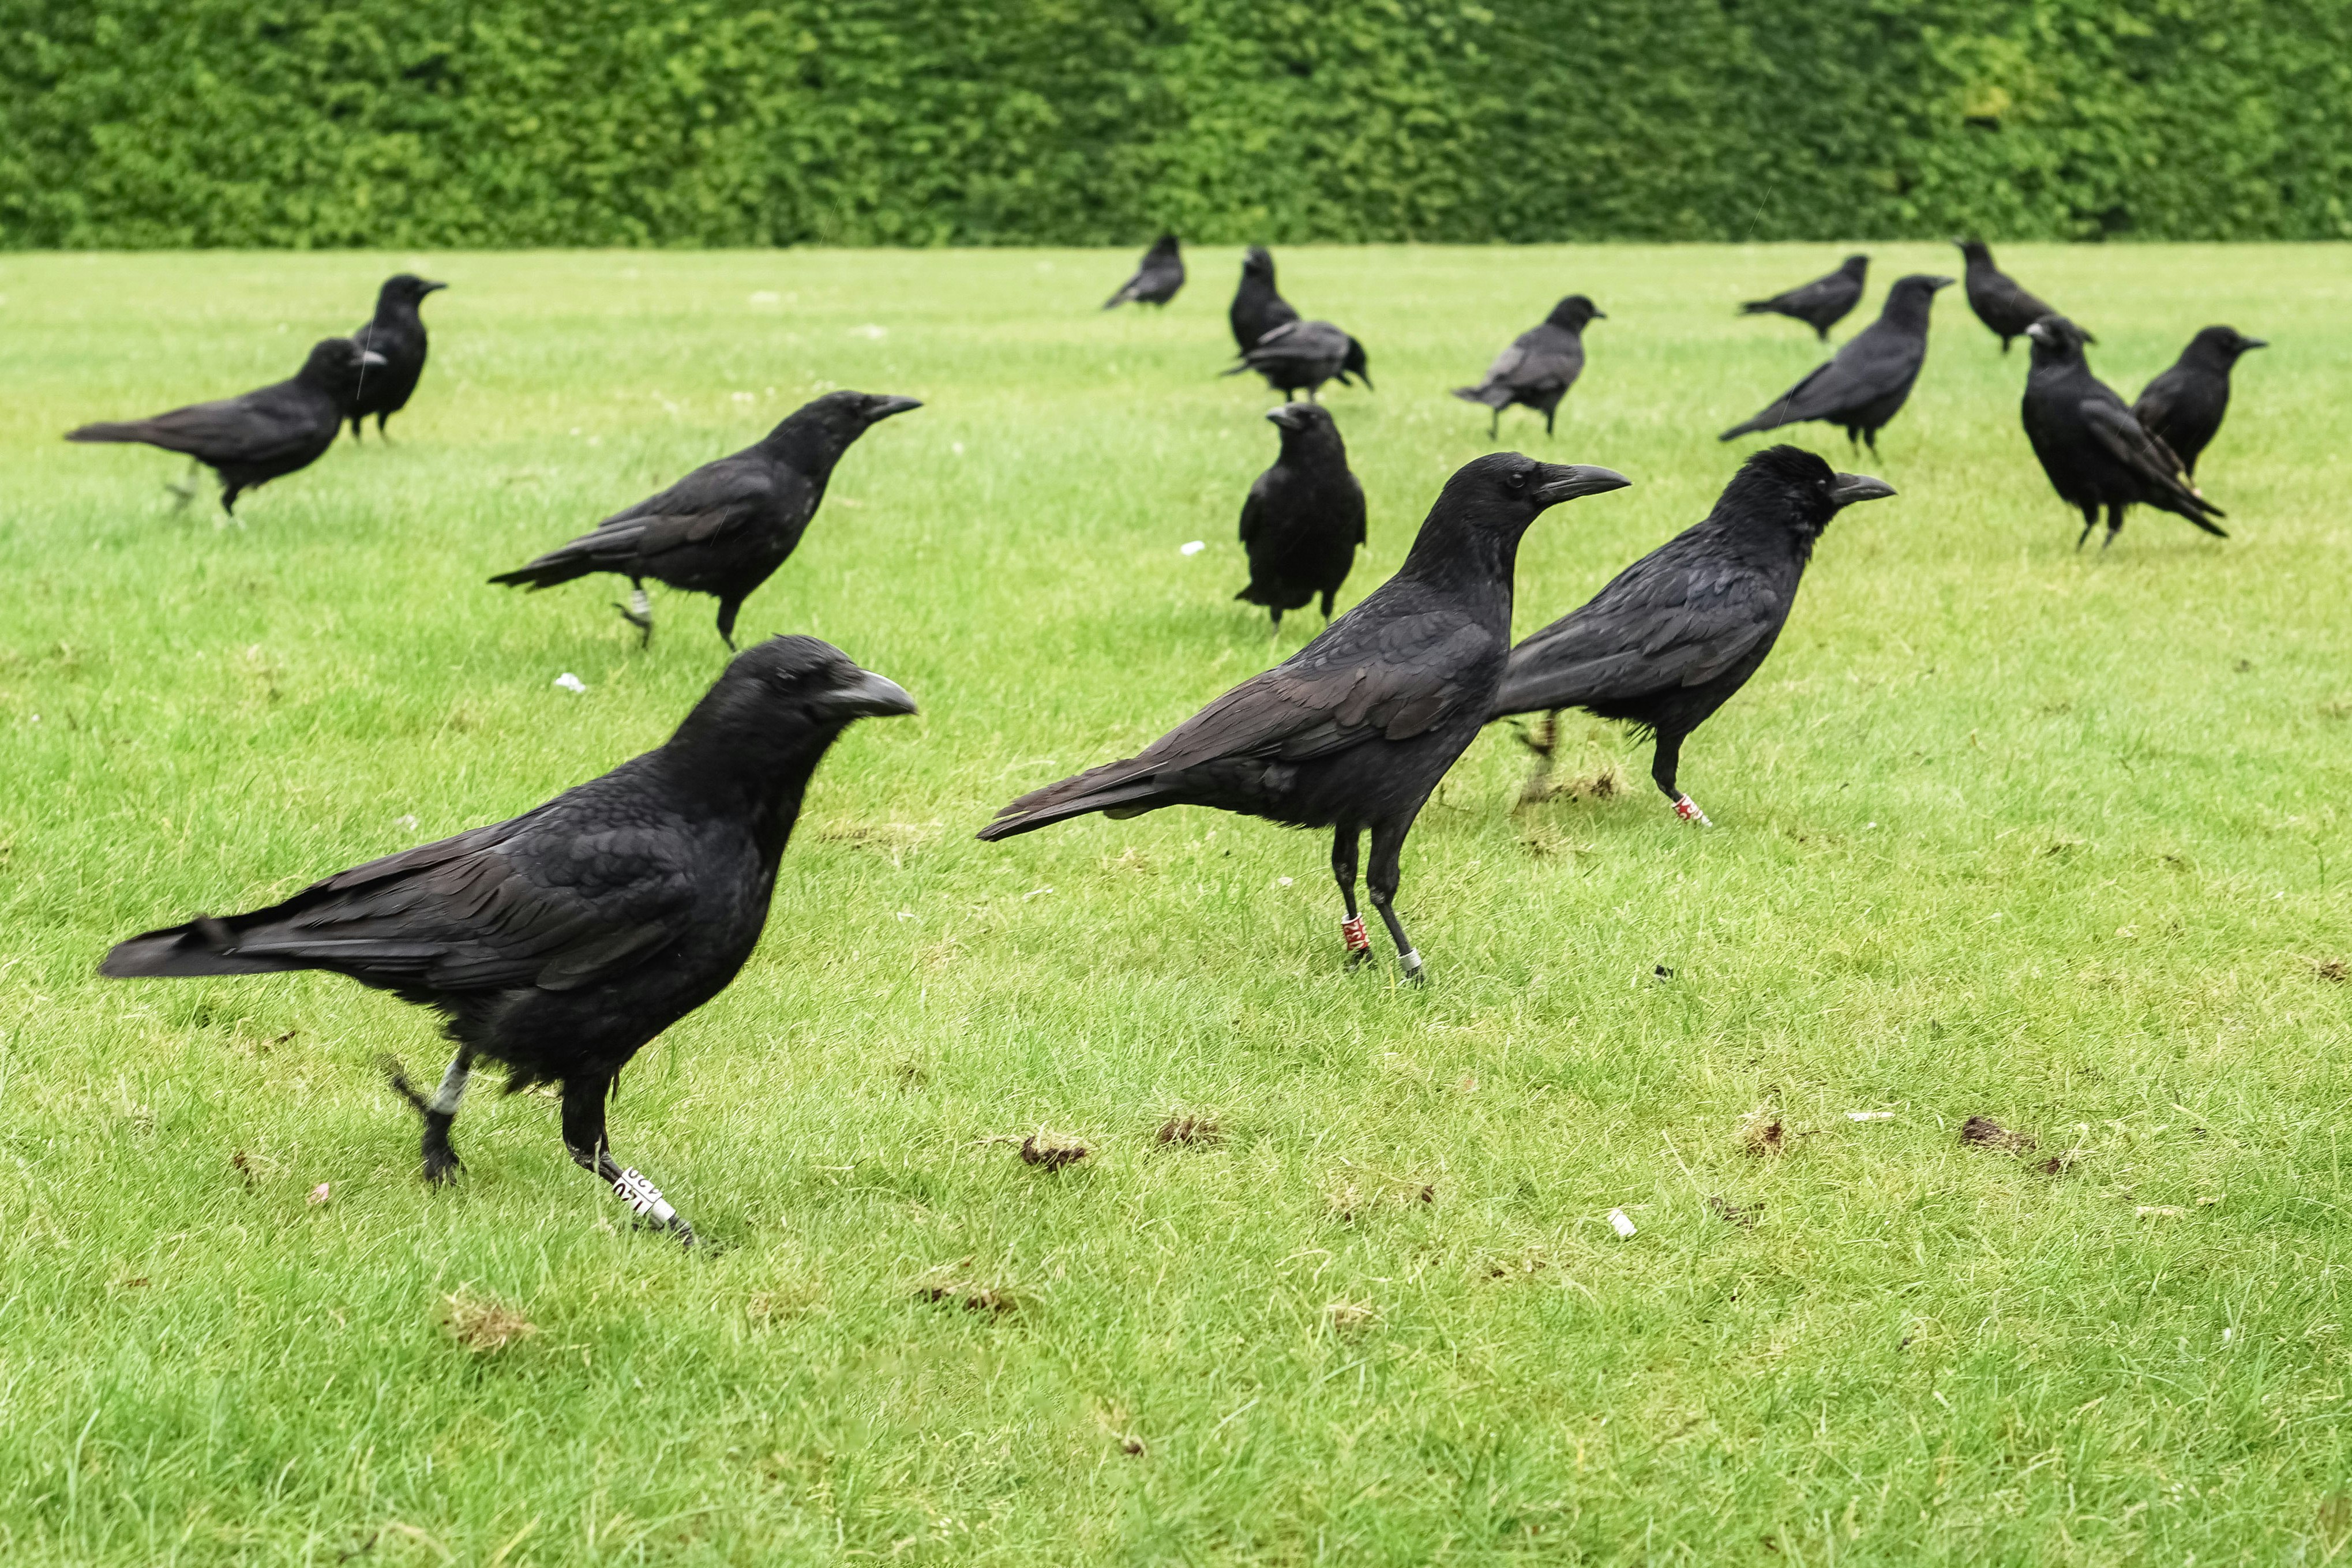 black crow on green grass during daytime